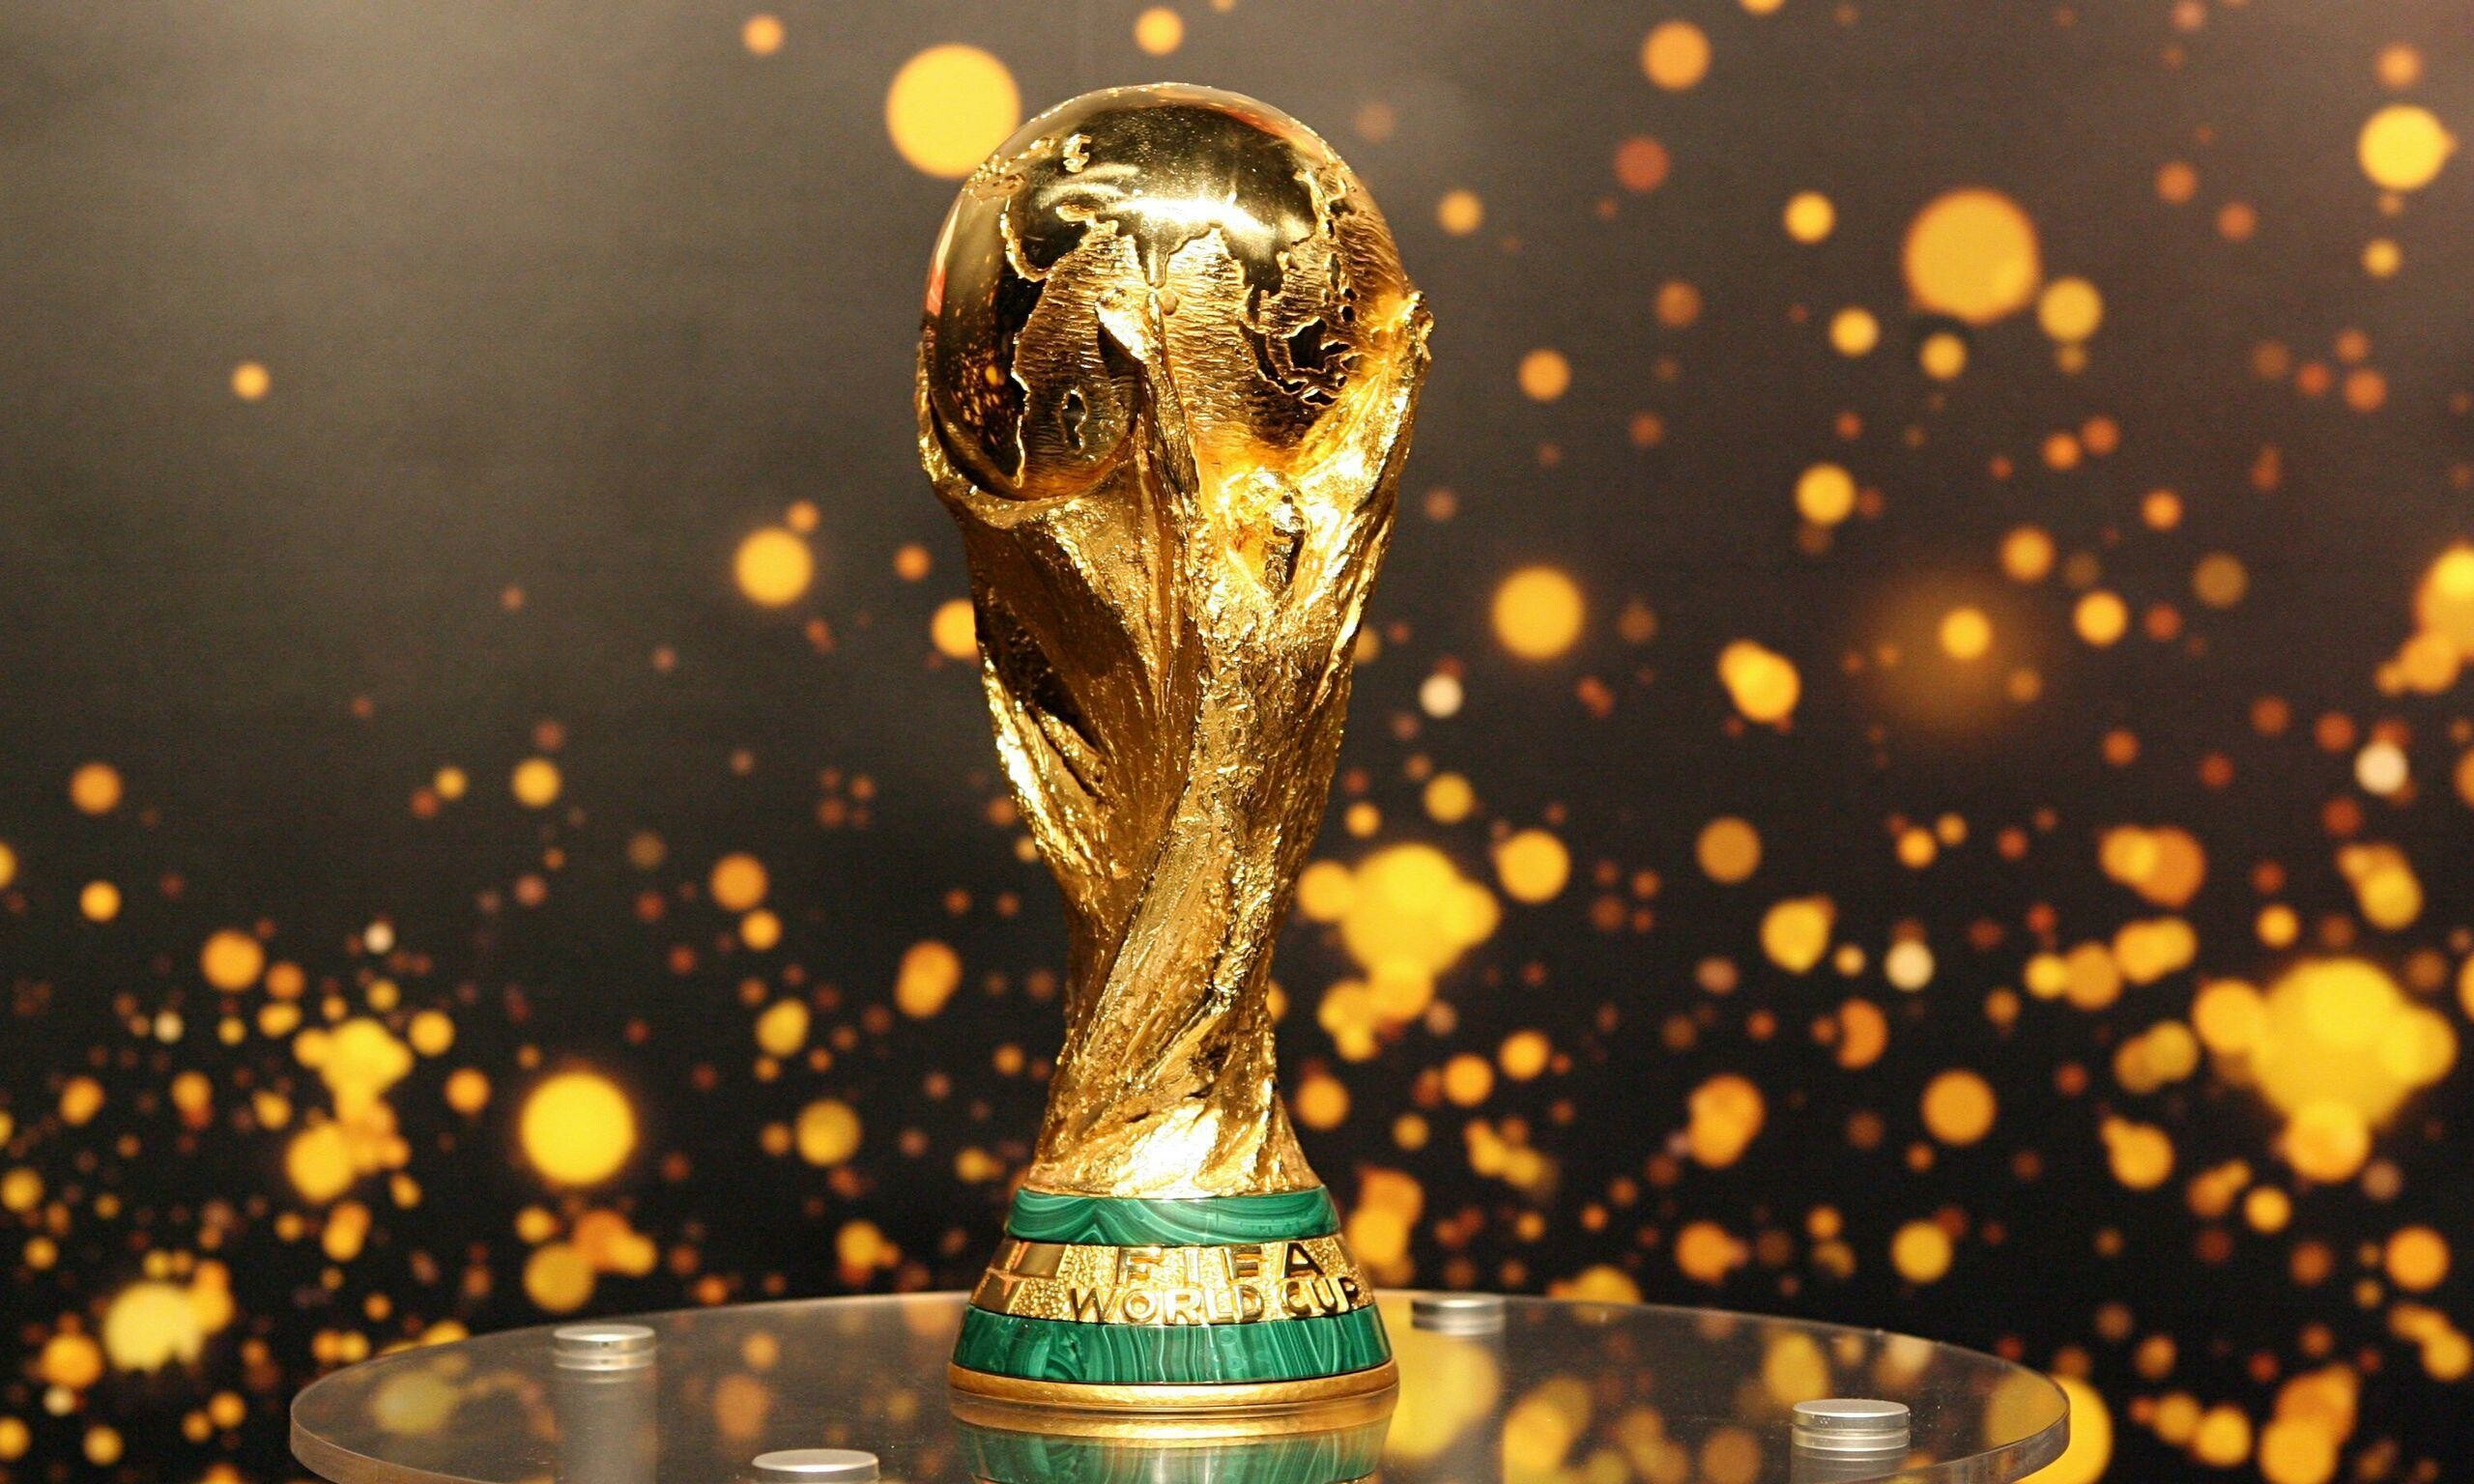 2022 FIFA World Cup, Trophy wallpapers, Global sporting event, Soccer fever, 2560x1540 HD Desktop